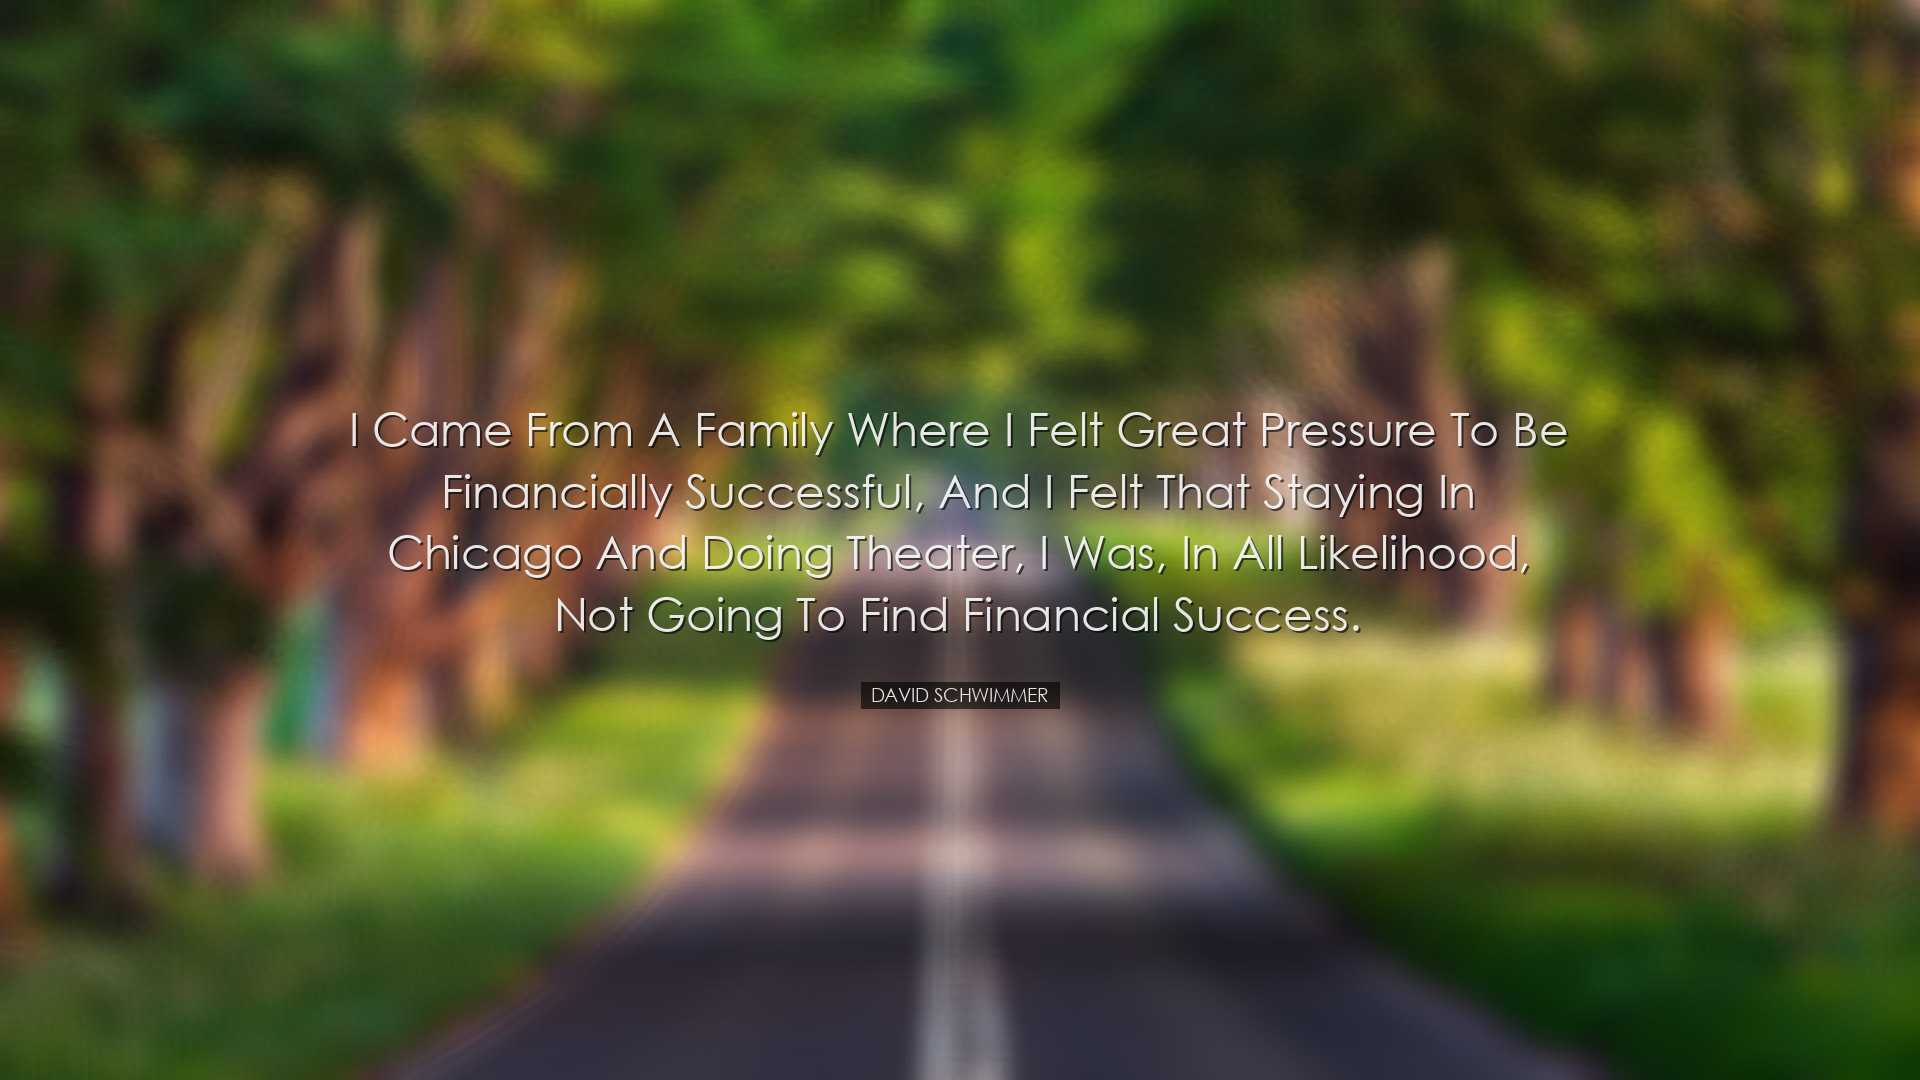 I came from a family where I felt great pressure to be financially